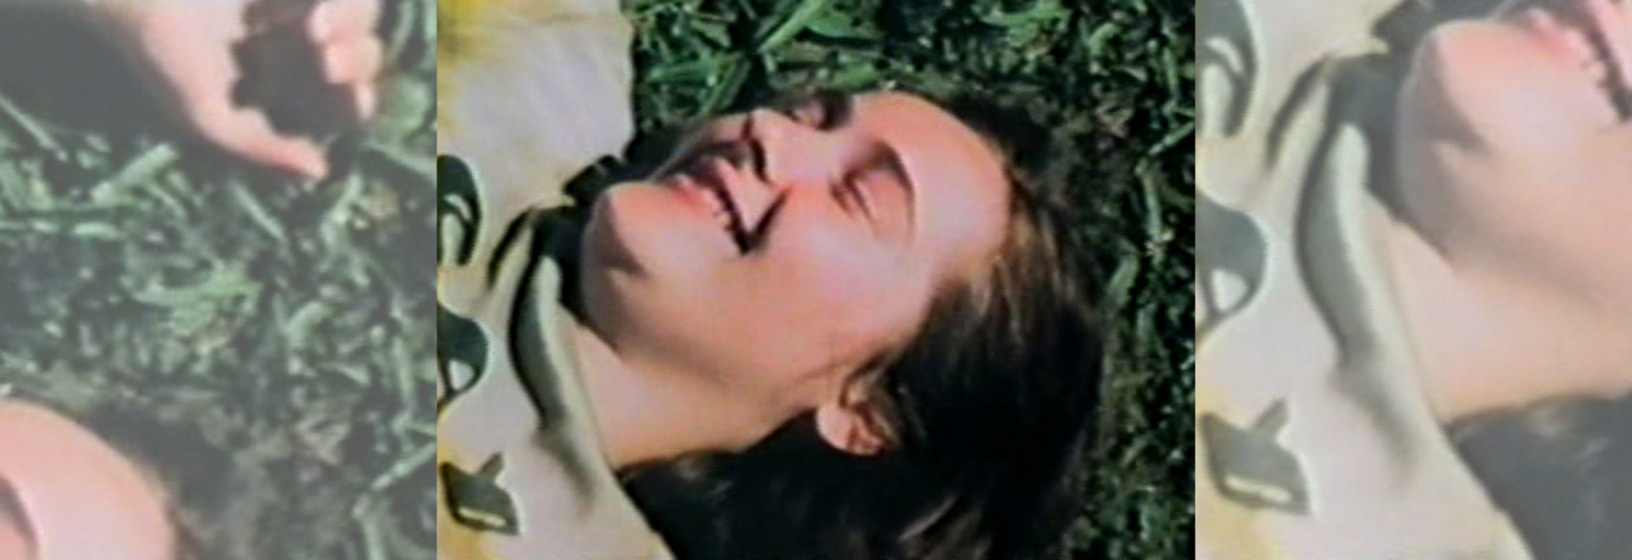 Colour photograph, close up, woman lying on grass smiling, collaged to create a banner image.